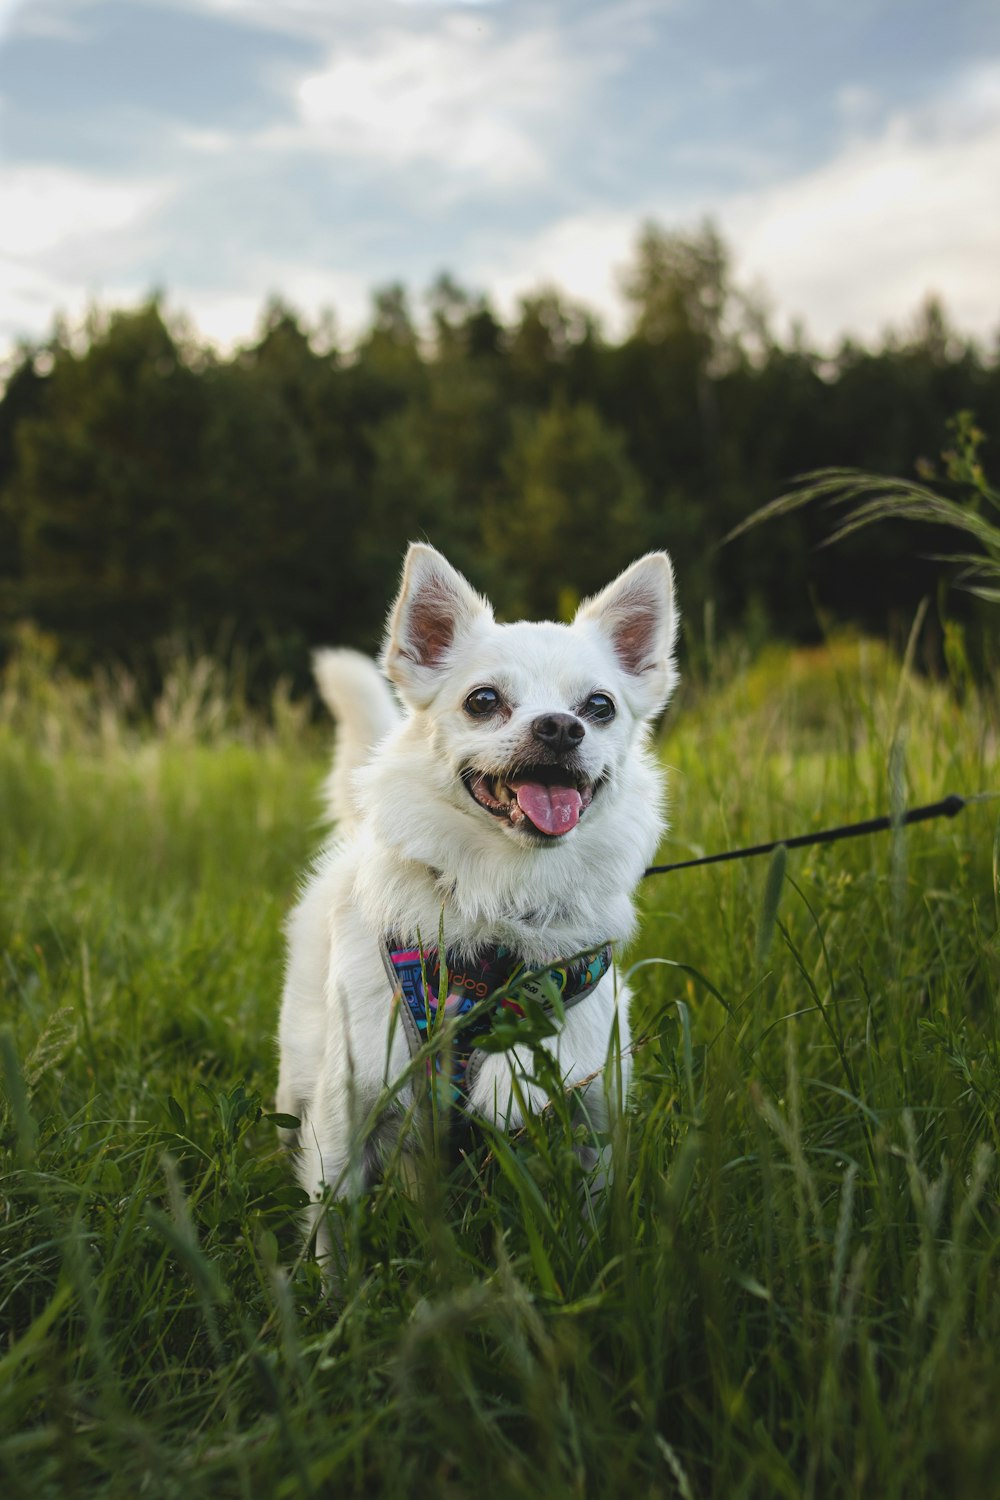 a dog on a leash in a grassy field